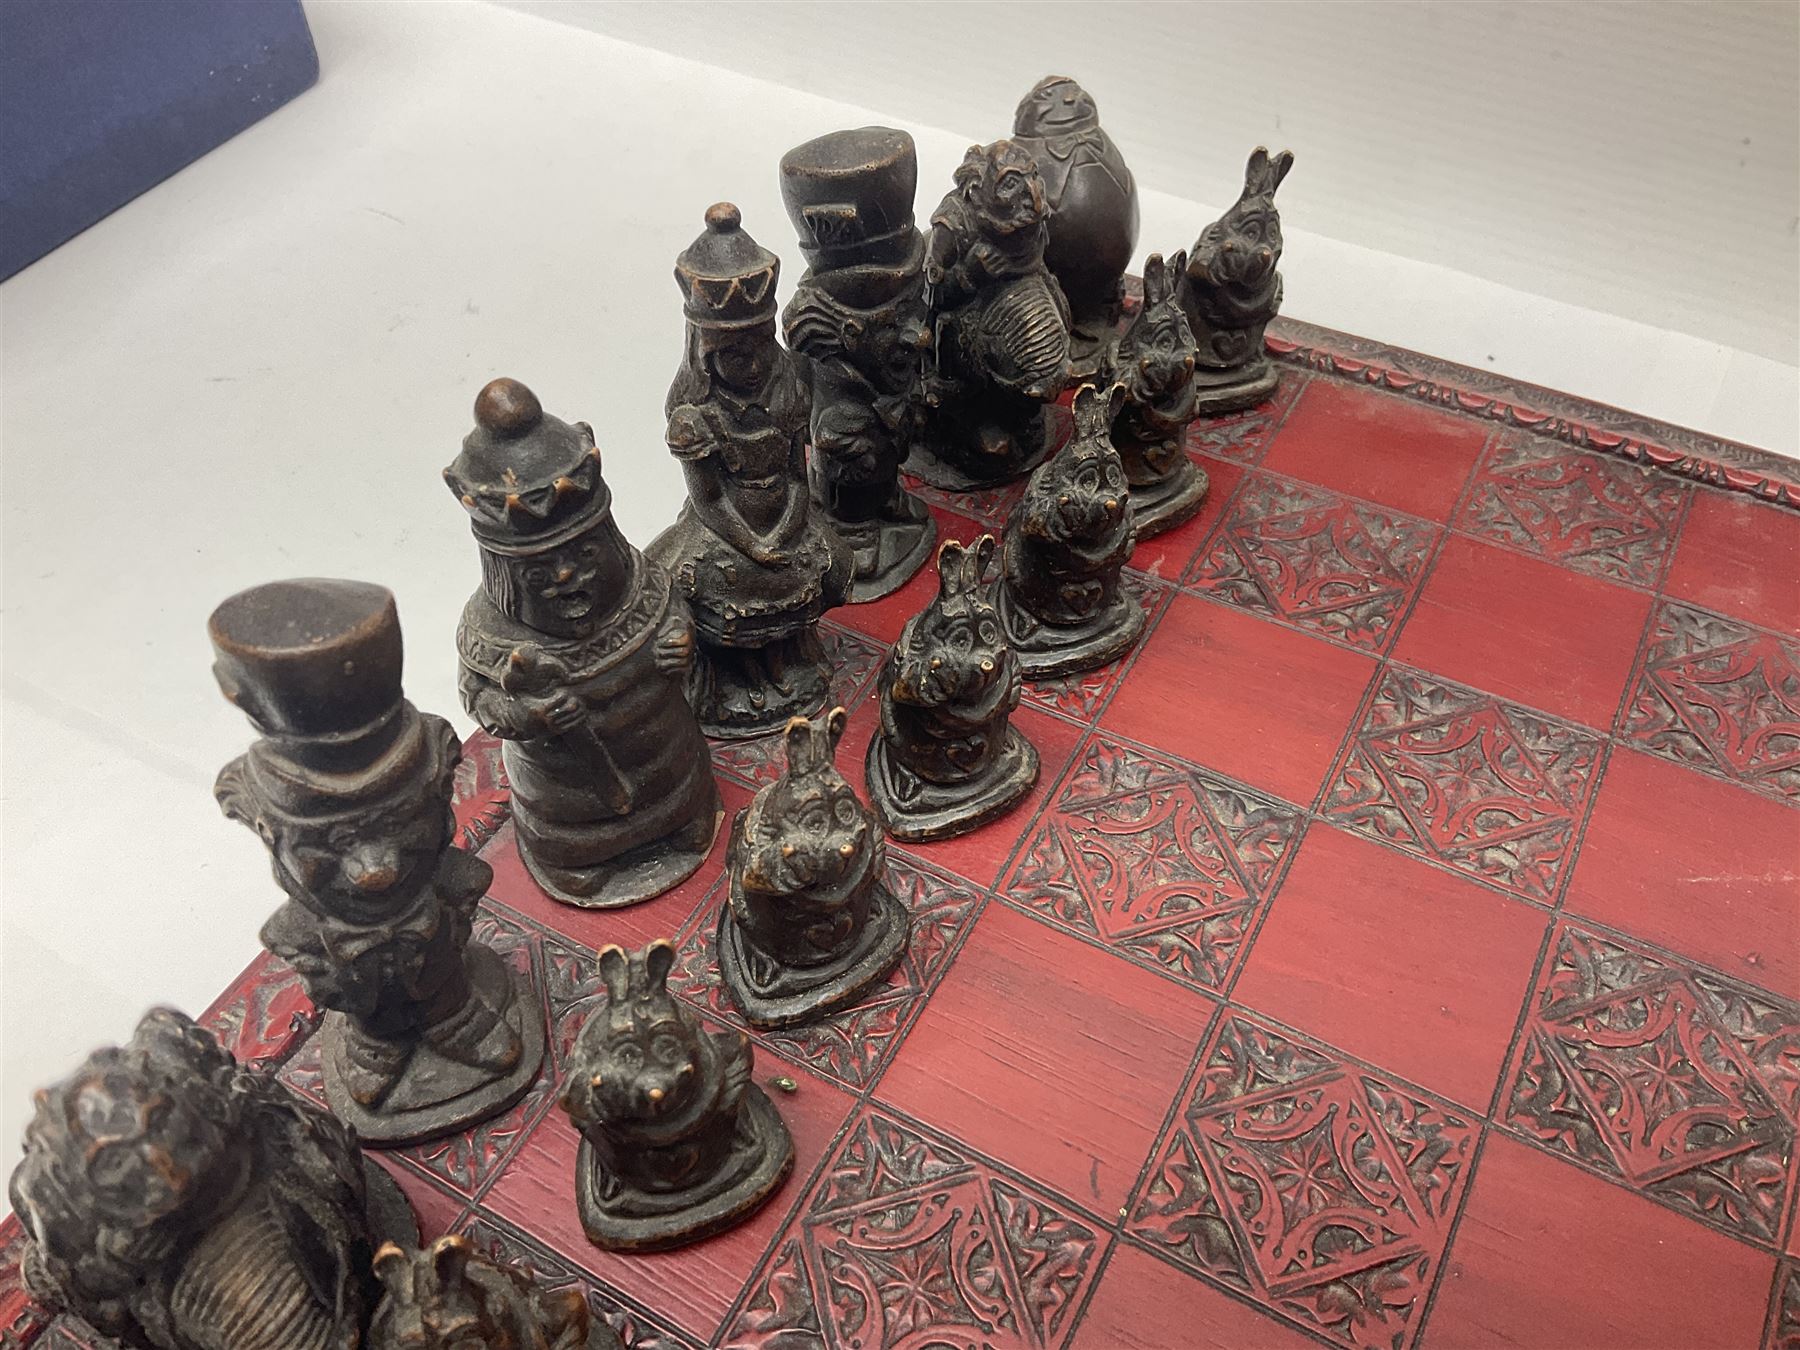 Alice in Wonderland themed chess set - Image 6 of 11